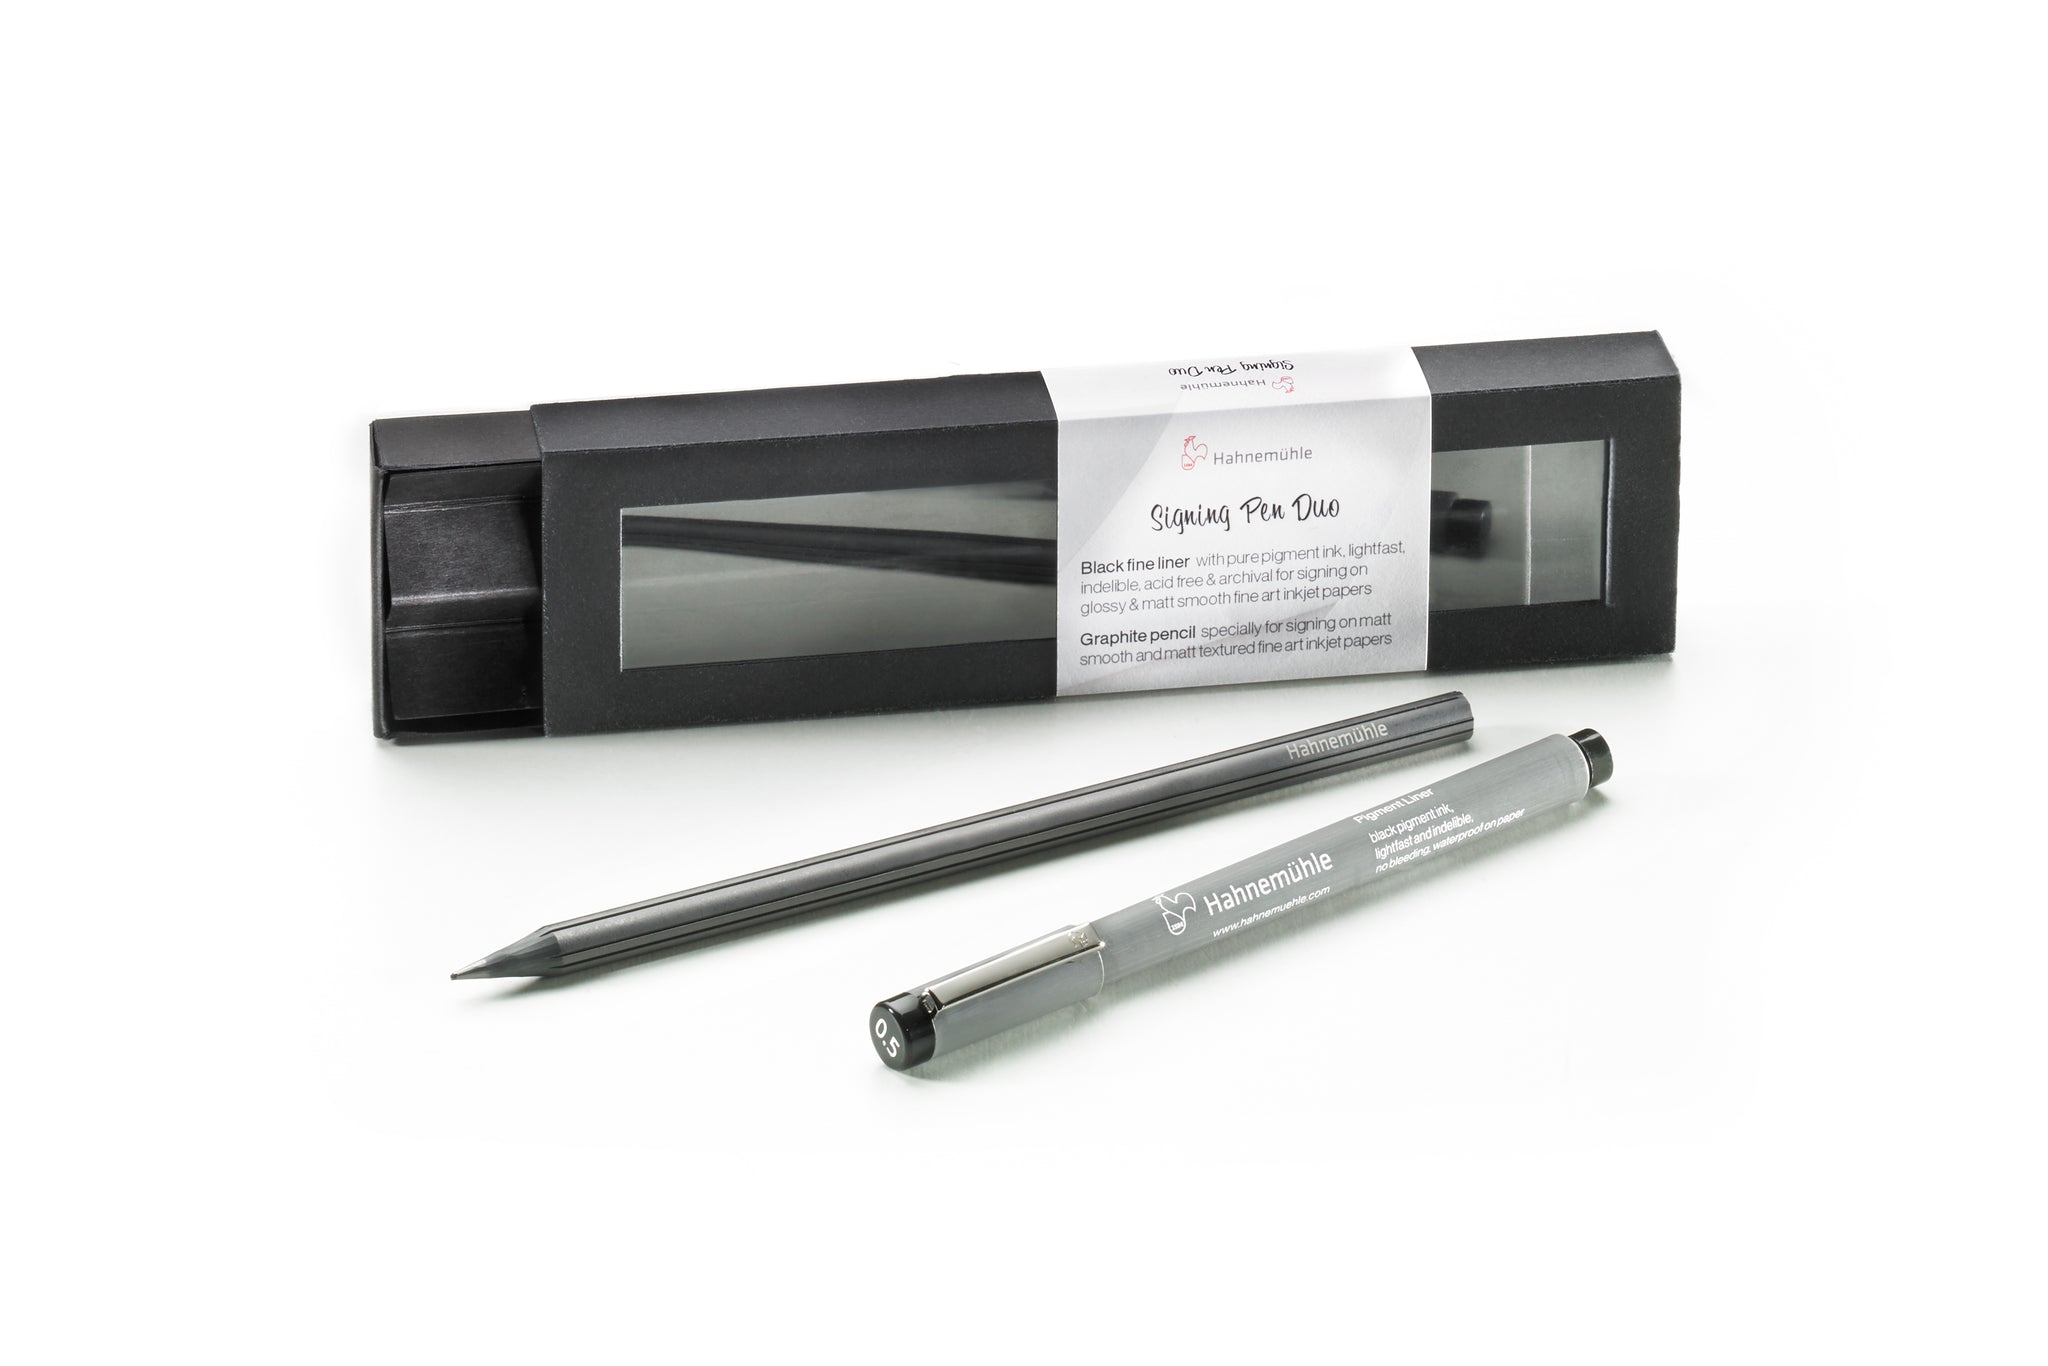 Hahnemuehle Signing Pen Duo